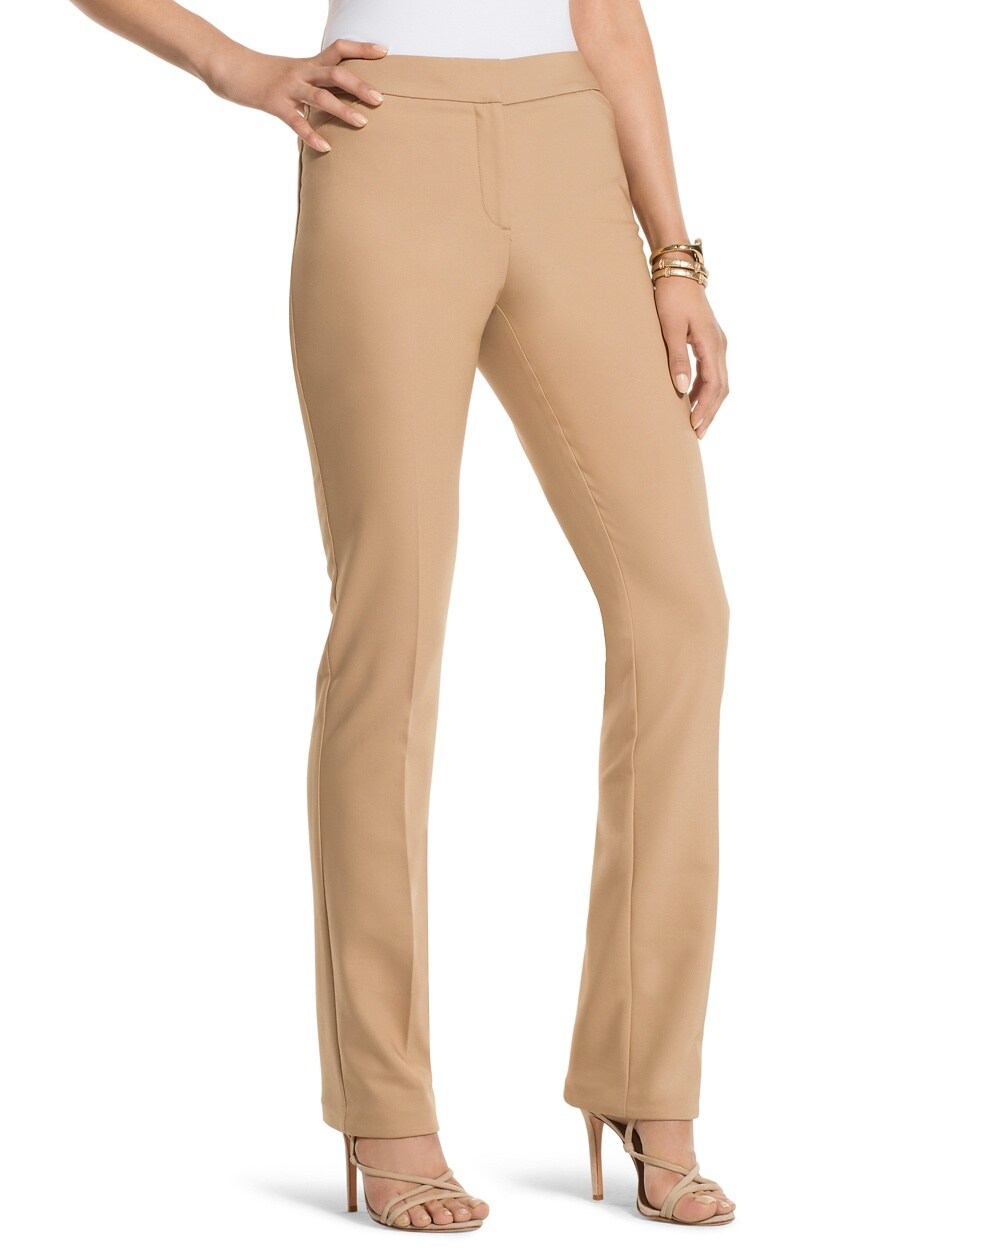 So Slimming Grace Pants Tall Length - Chico's